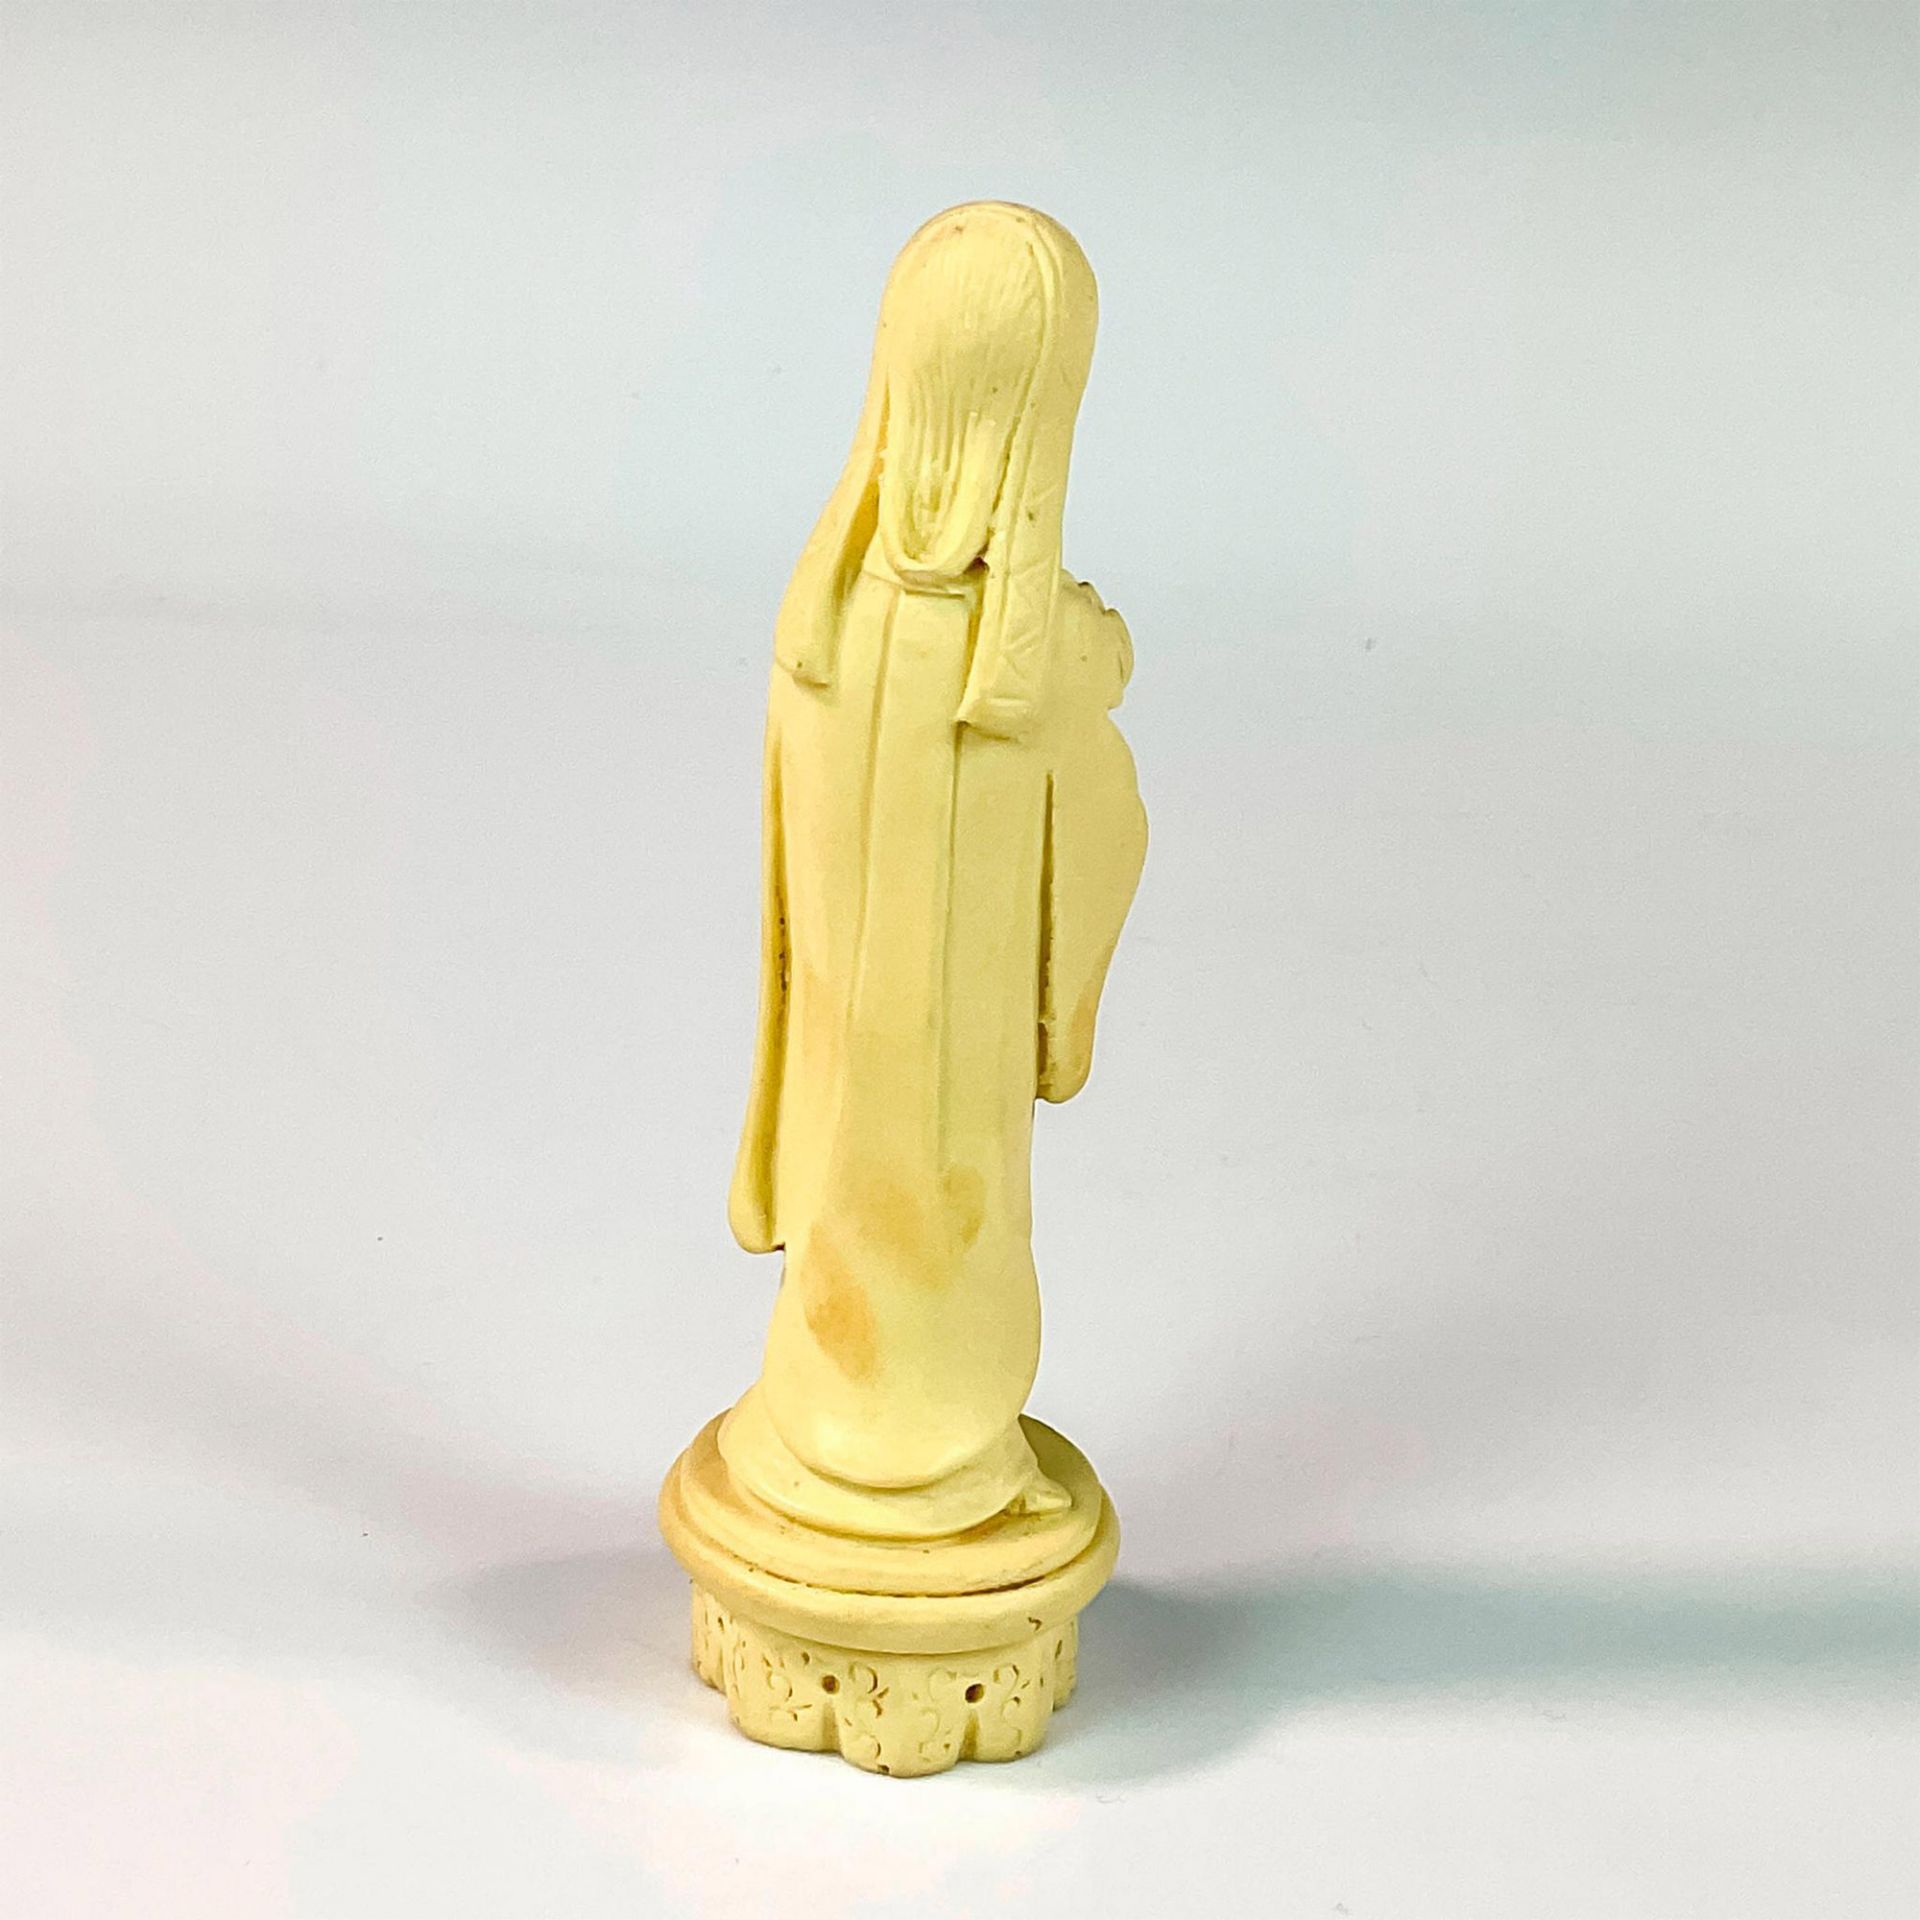 Chinese Small Resin Guanyin Figurine - Image 2 of 3